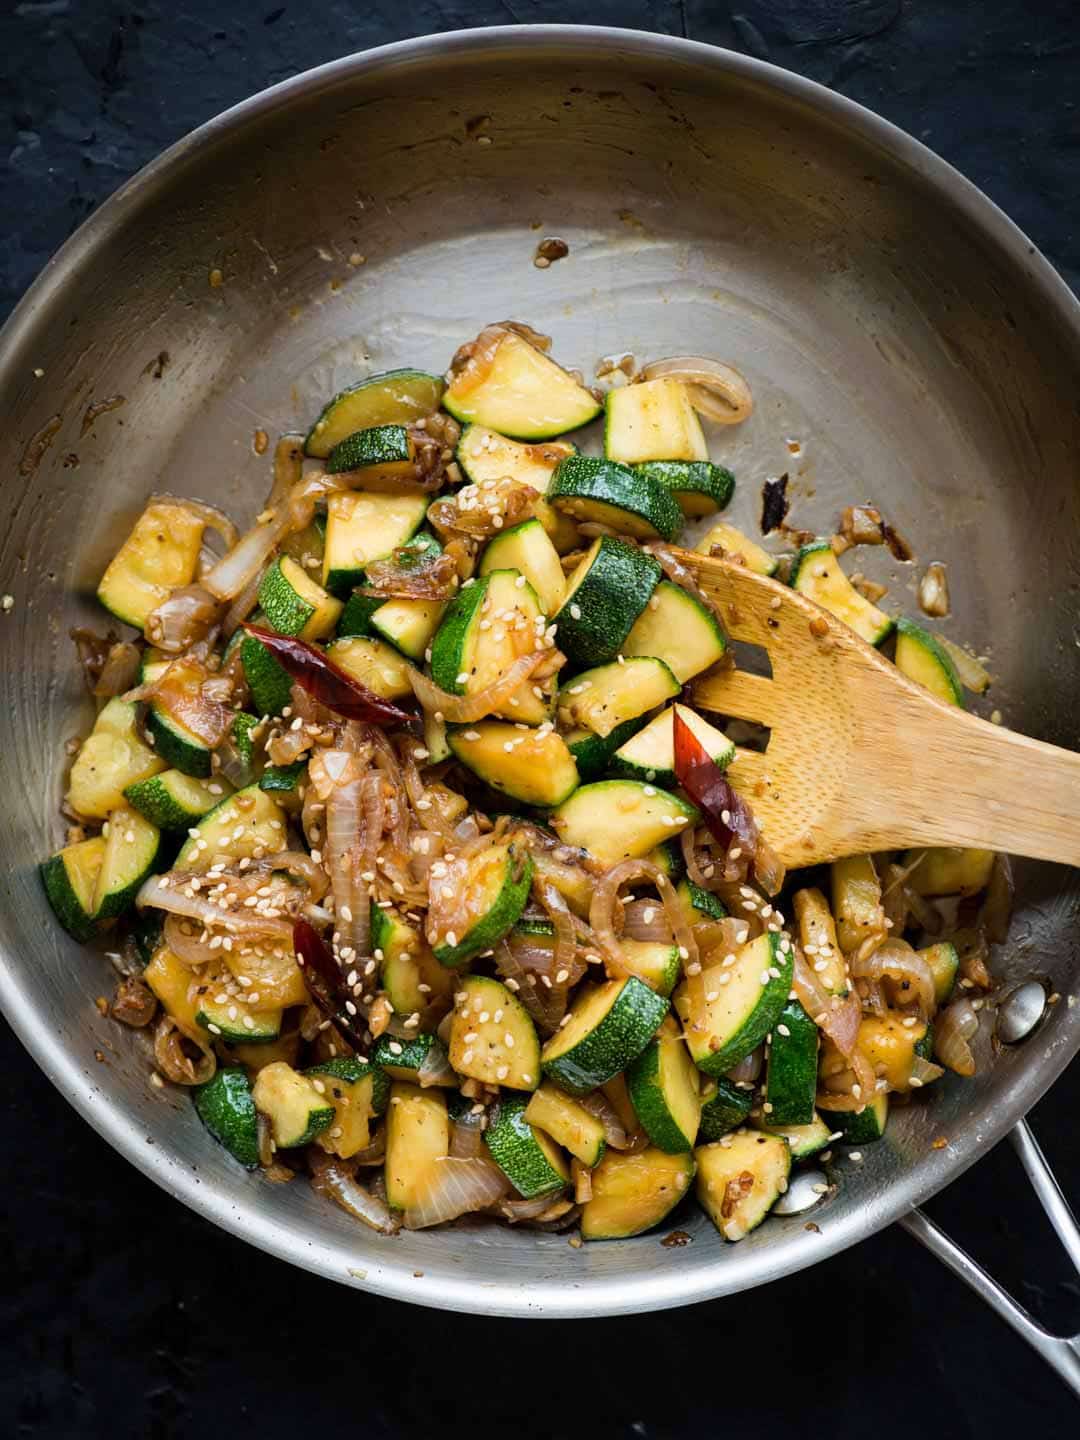 Zucchini Stir Fry The Flavours Of Kitchen,Safflower Seeds For Planting